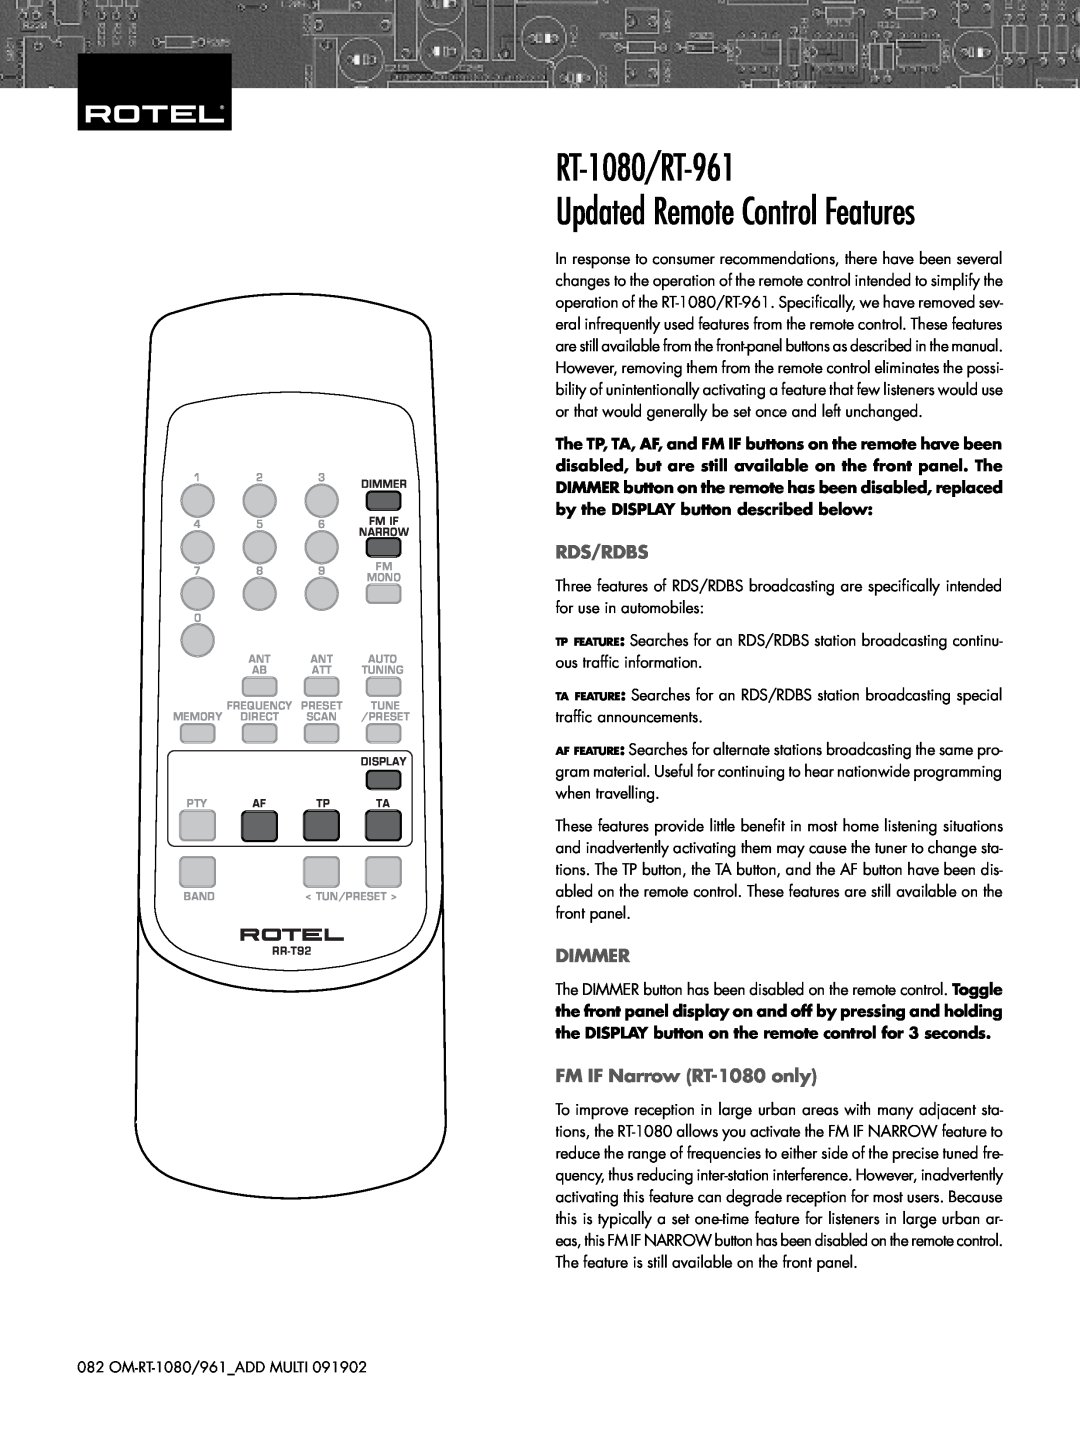 Rotel manual RT-1080/RT-961, Rds/Rdbs, Dimmer, FM IF Narrow RT-1080 only, Updated Remote Control Features 